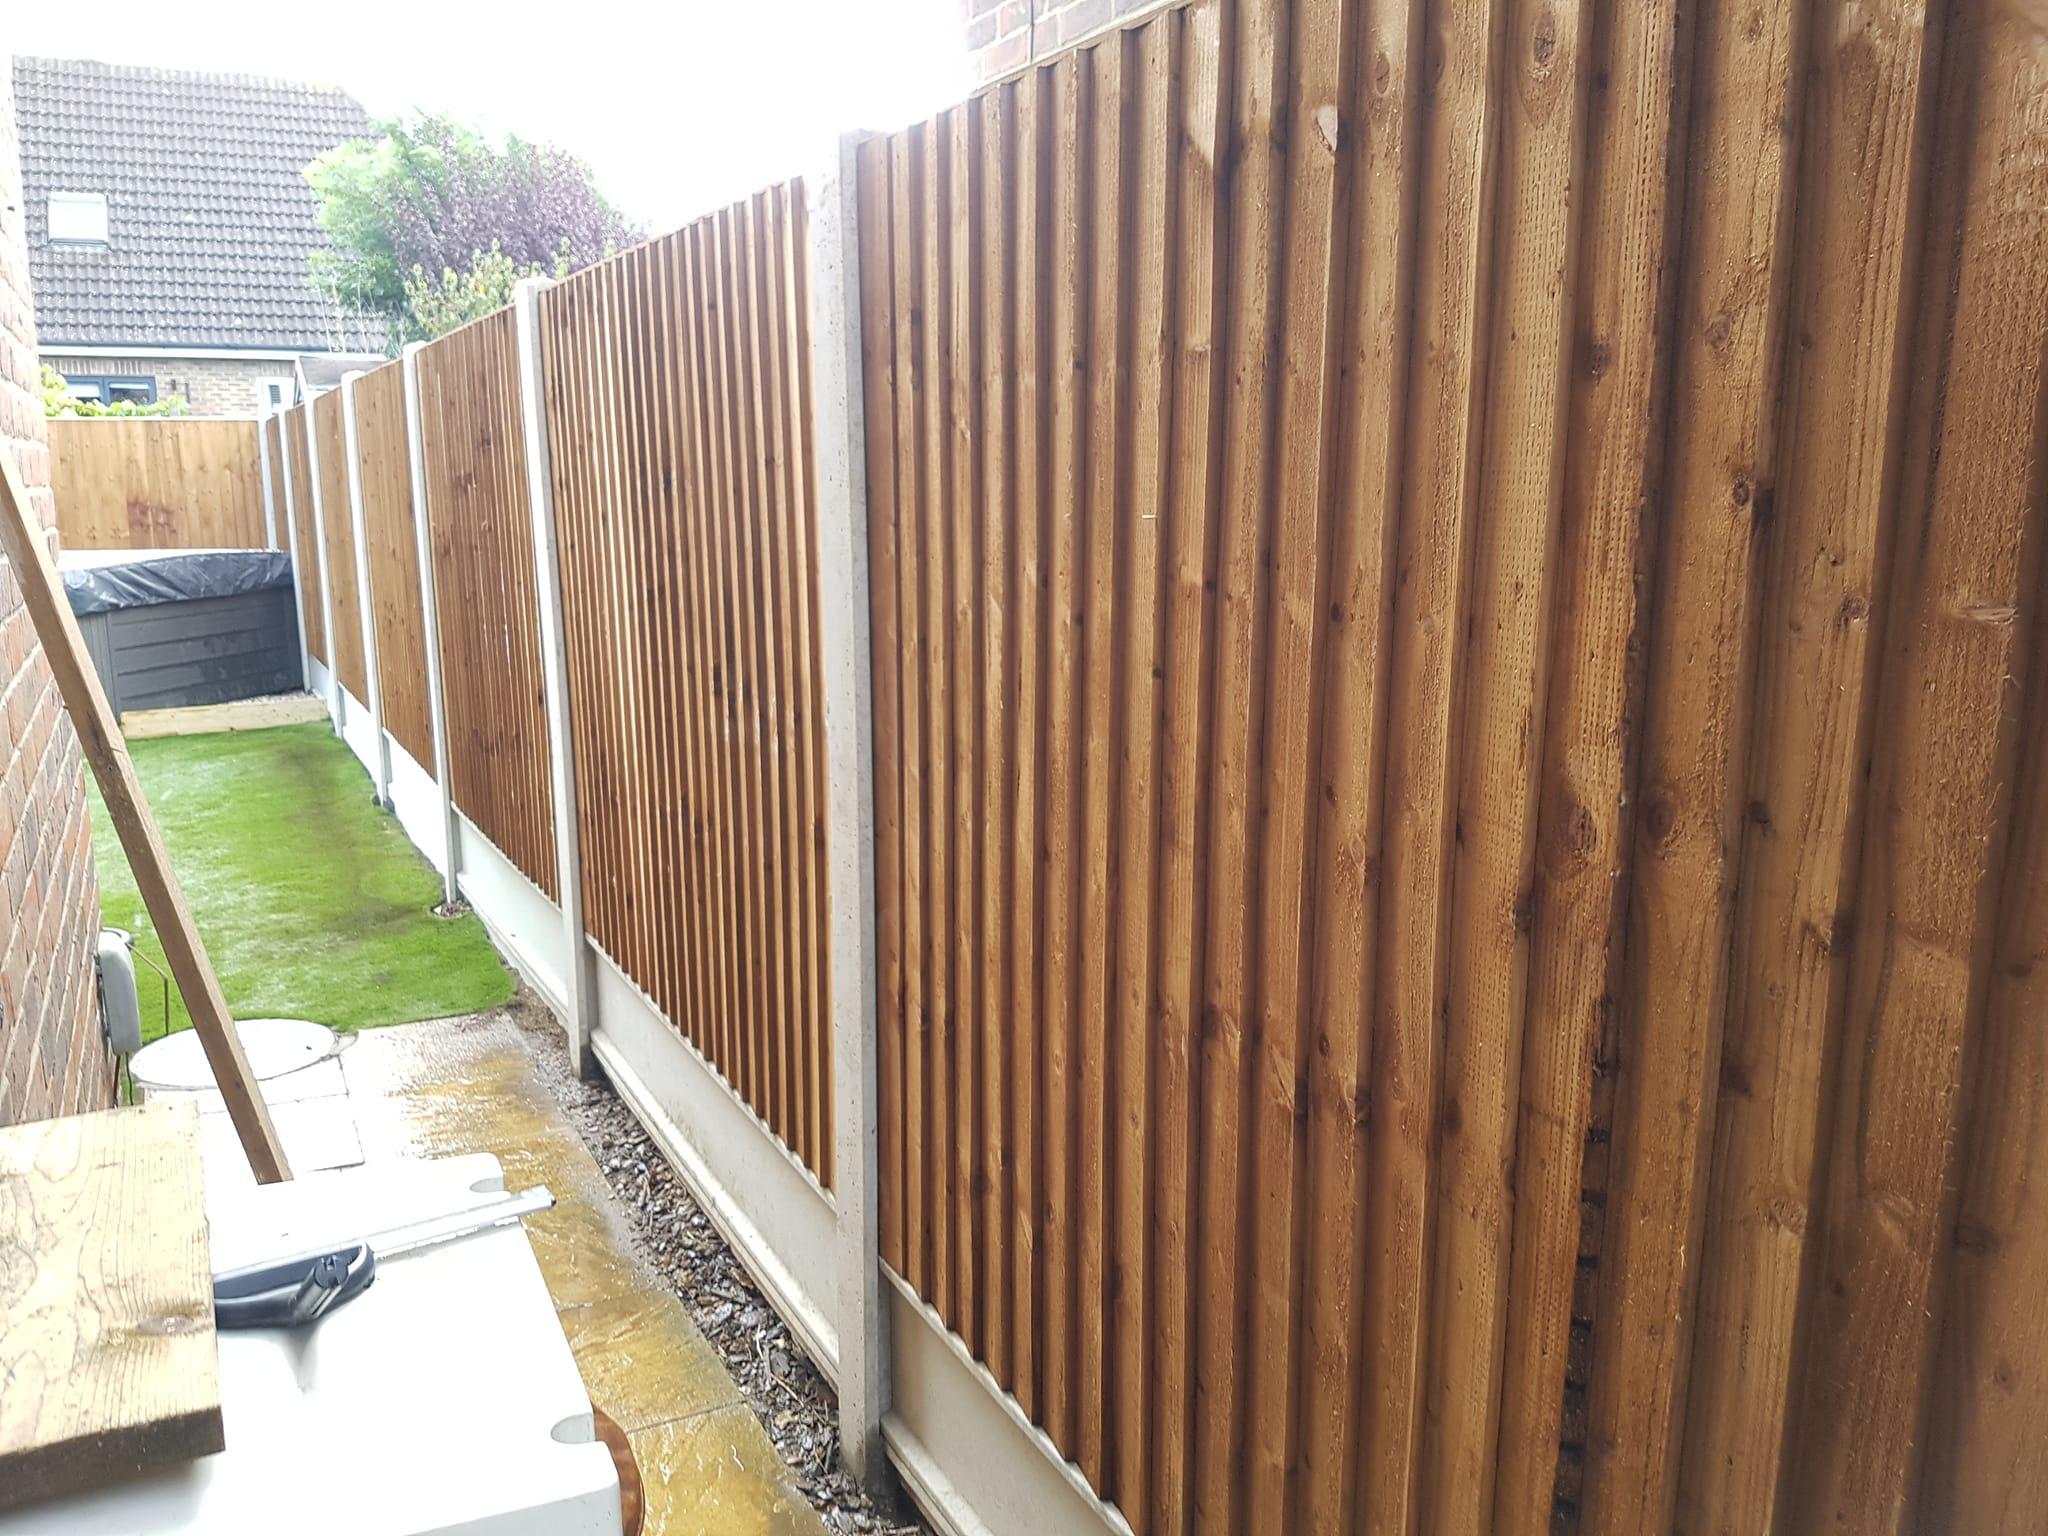 With concrete posts and gravelboard,  Fencing installed in St mary's island